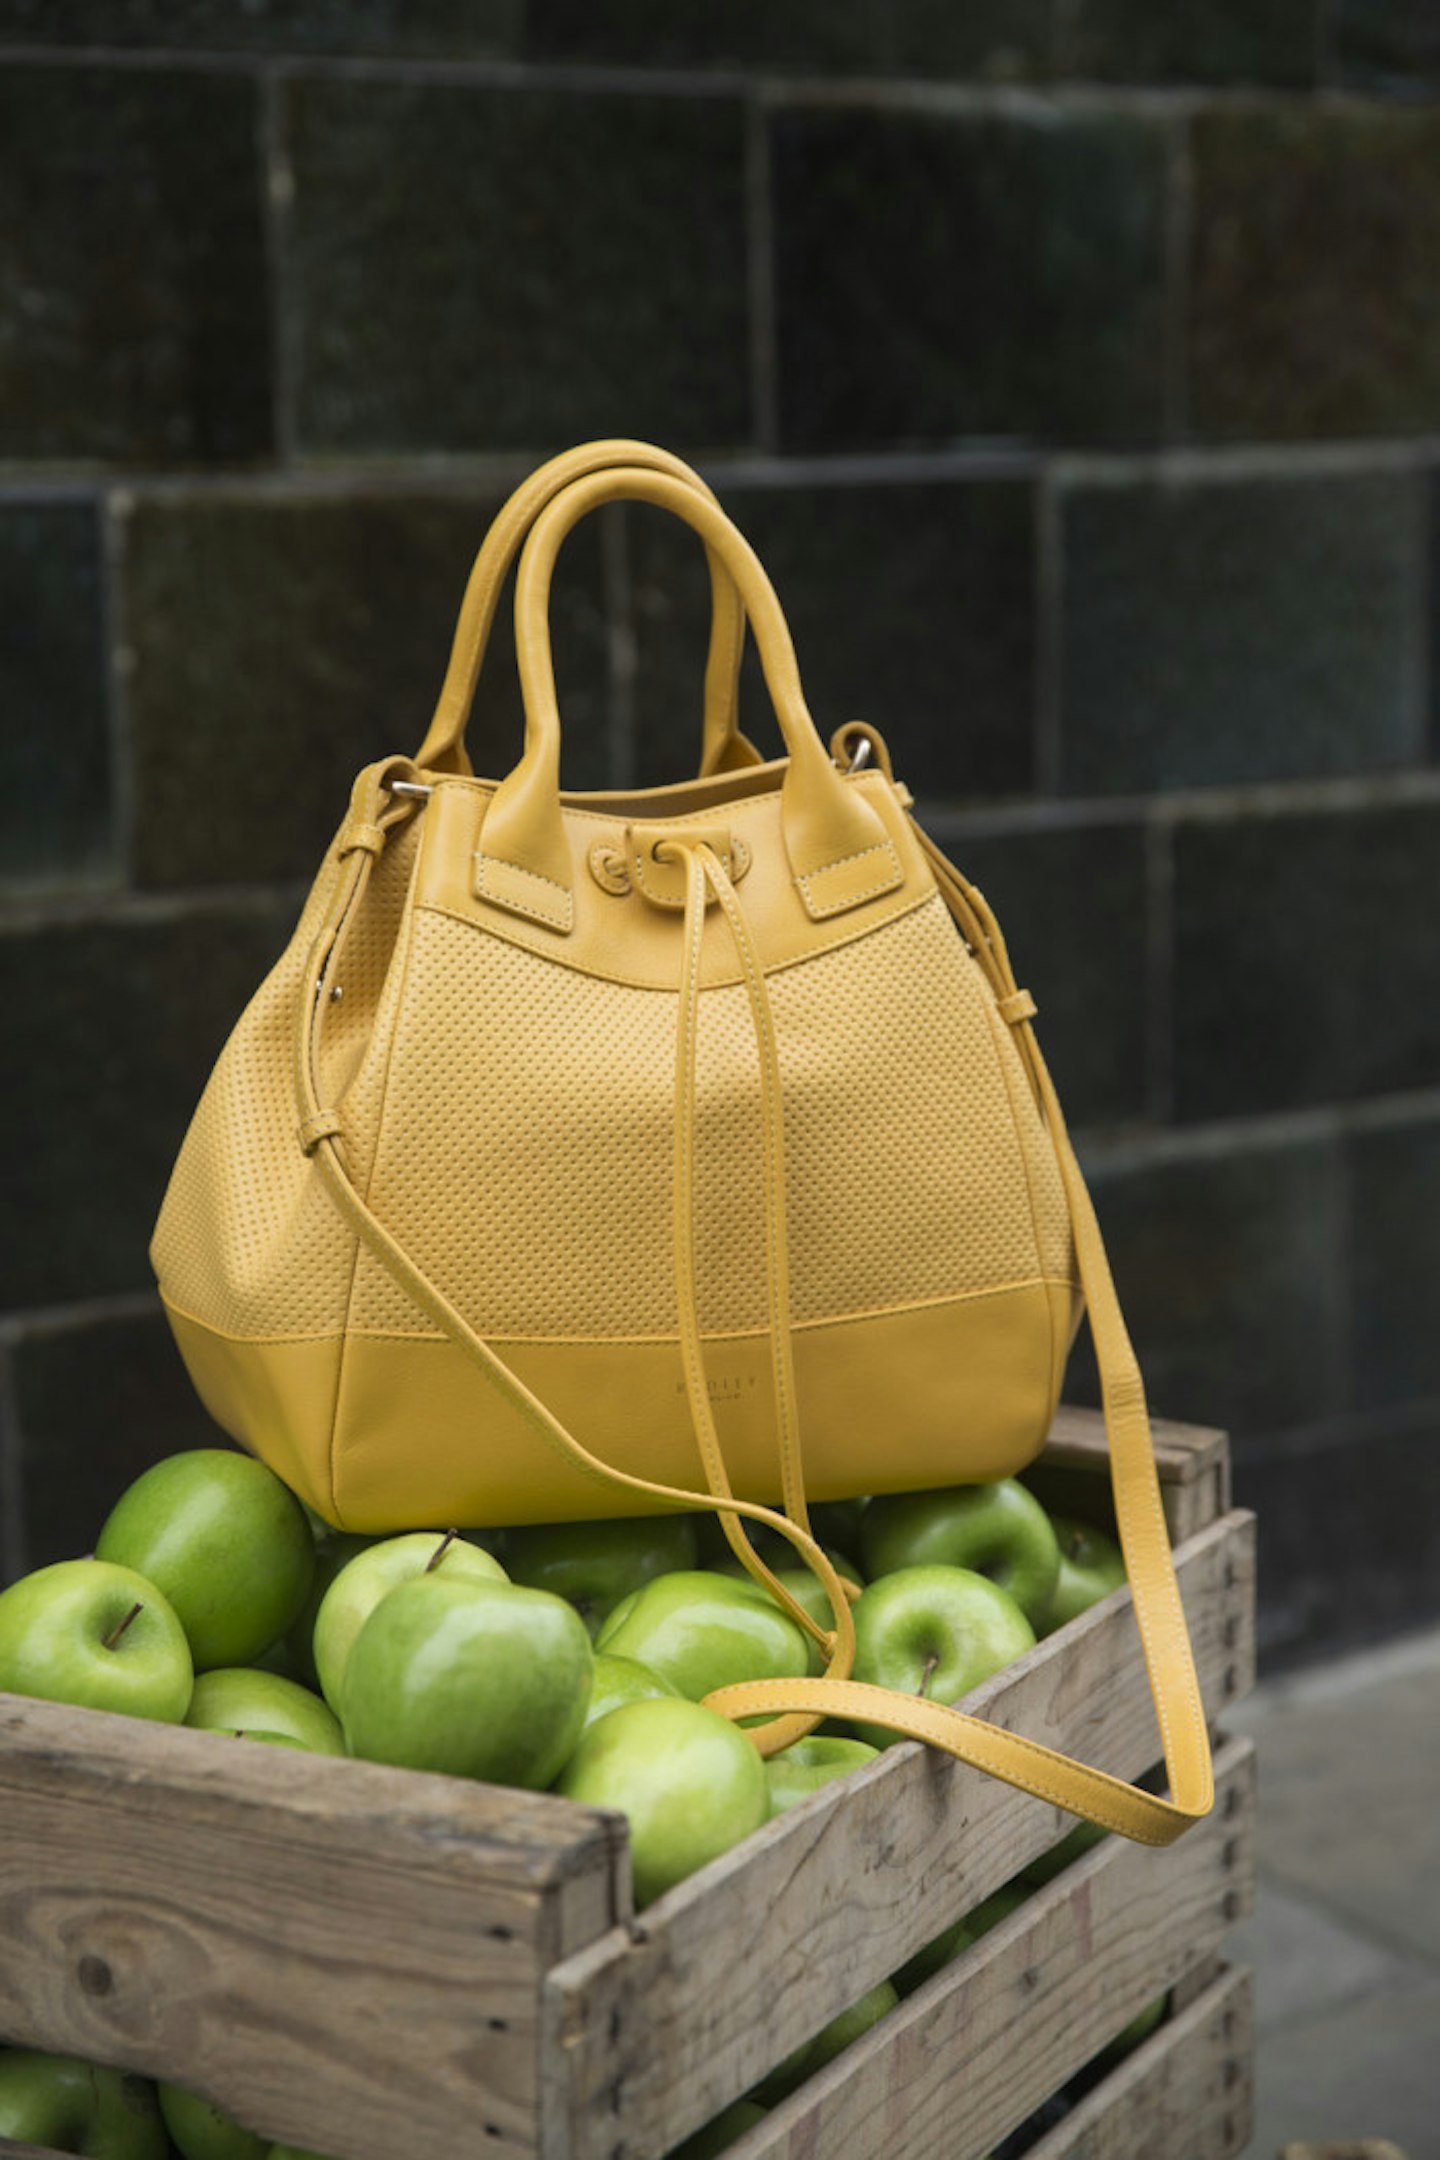 Holland Park from the new Radley collection SS15.